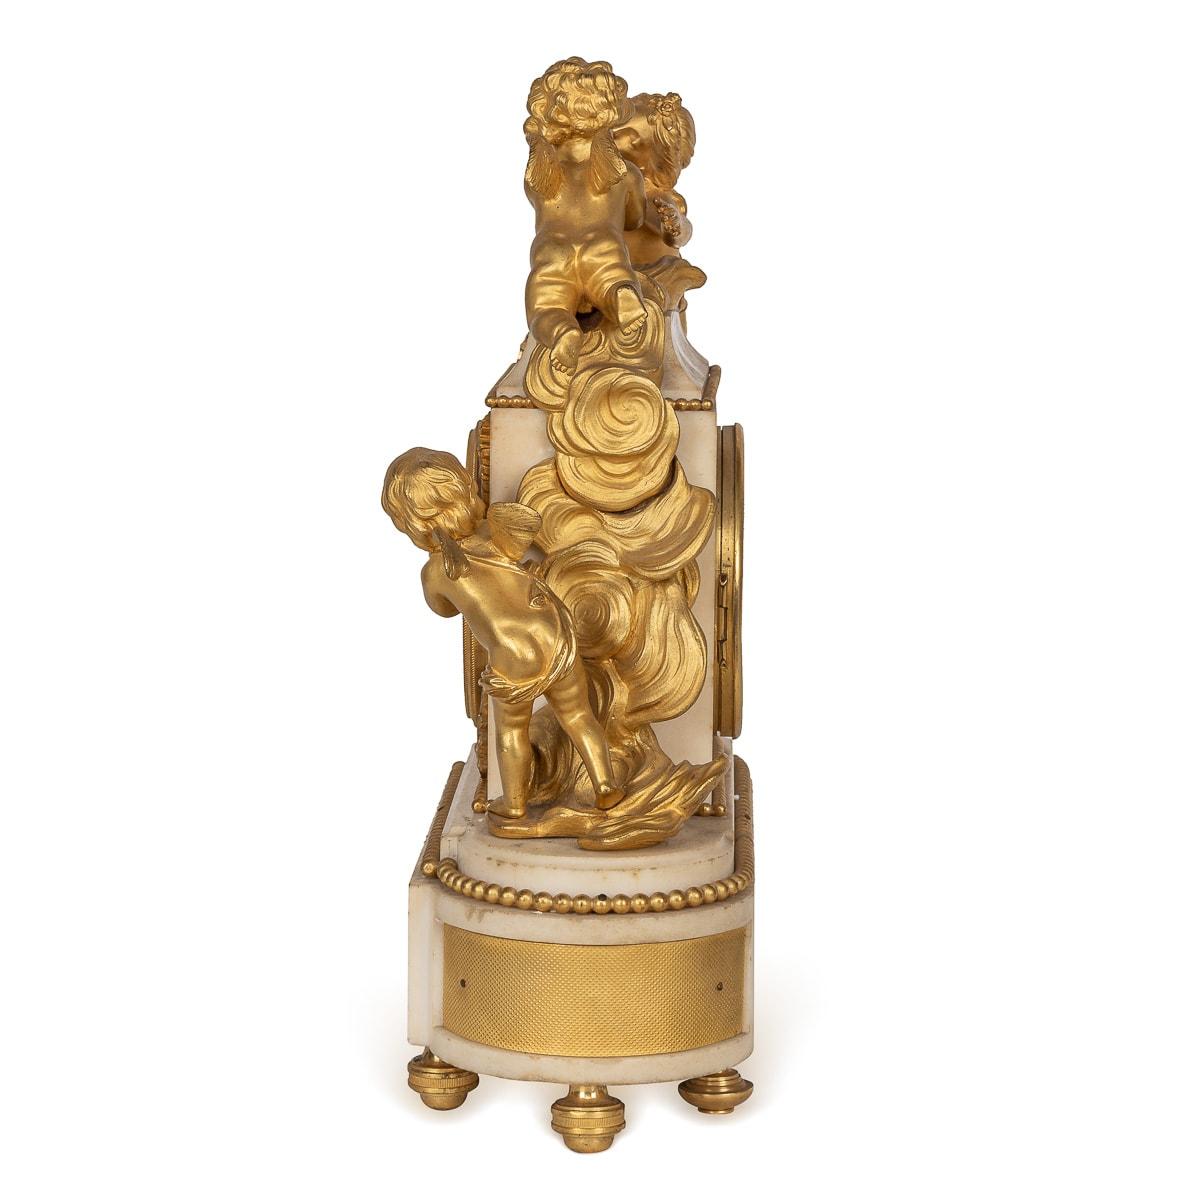 Crafted in France during the late 18th century, around 1790-1800, the 